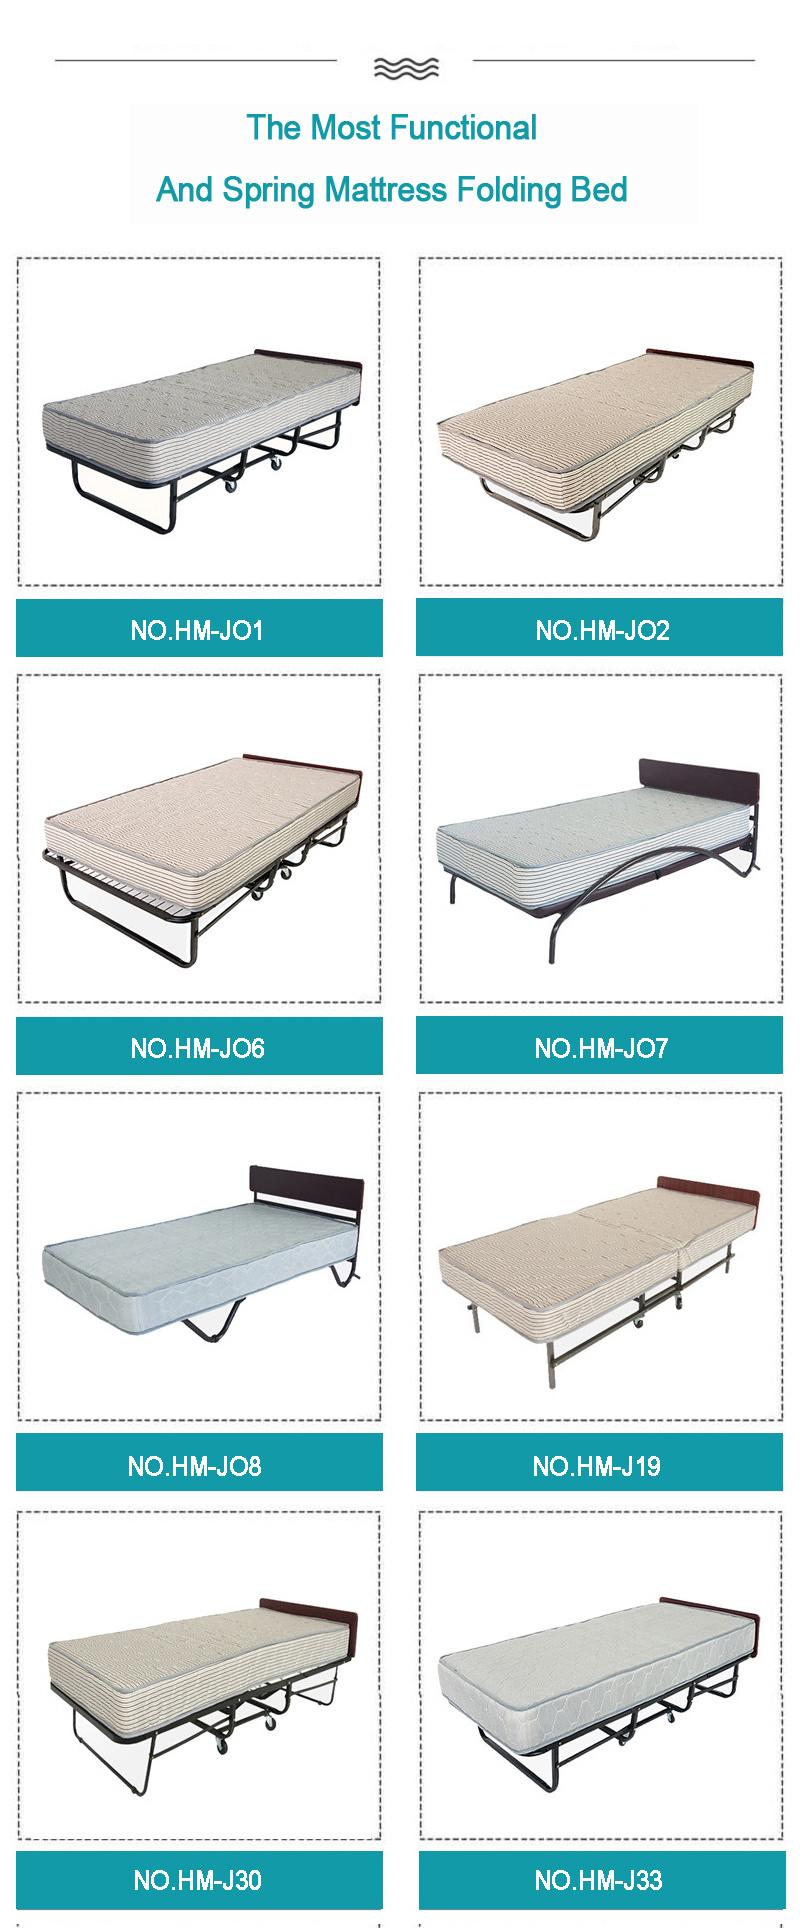 Best Selling Wholesale Folding Sleeping Bed Steel Furniture Easy to Receive for Employee